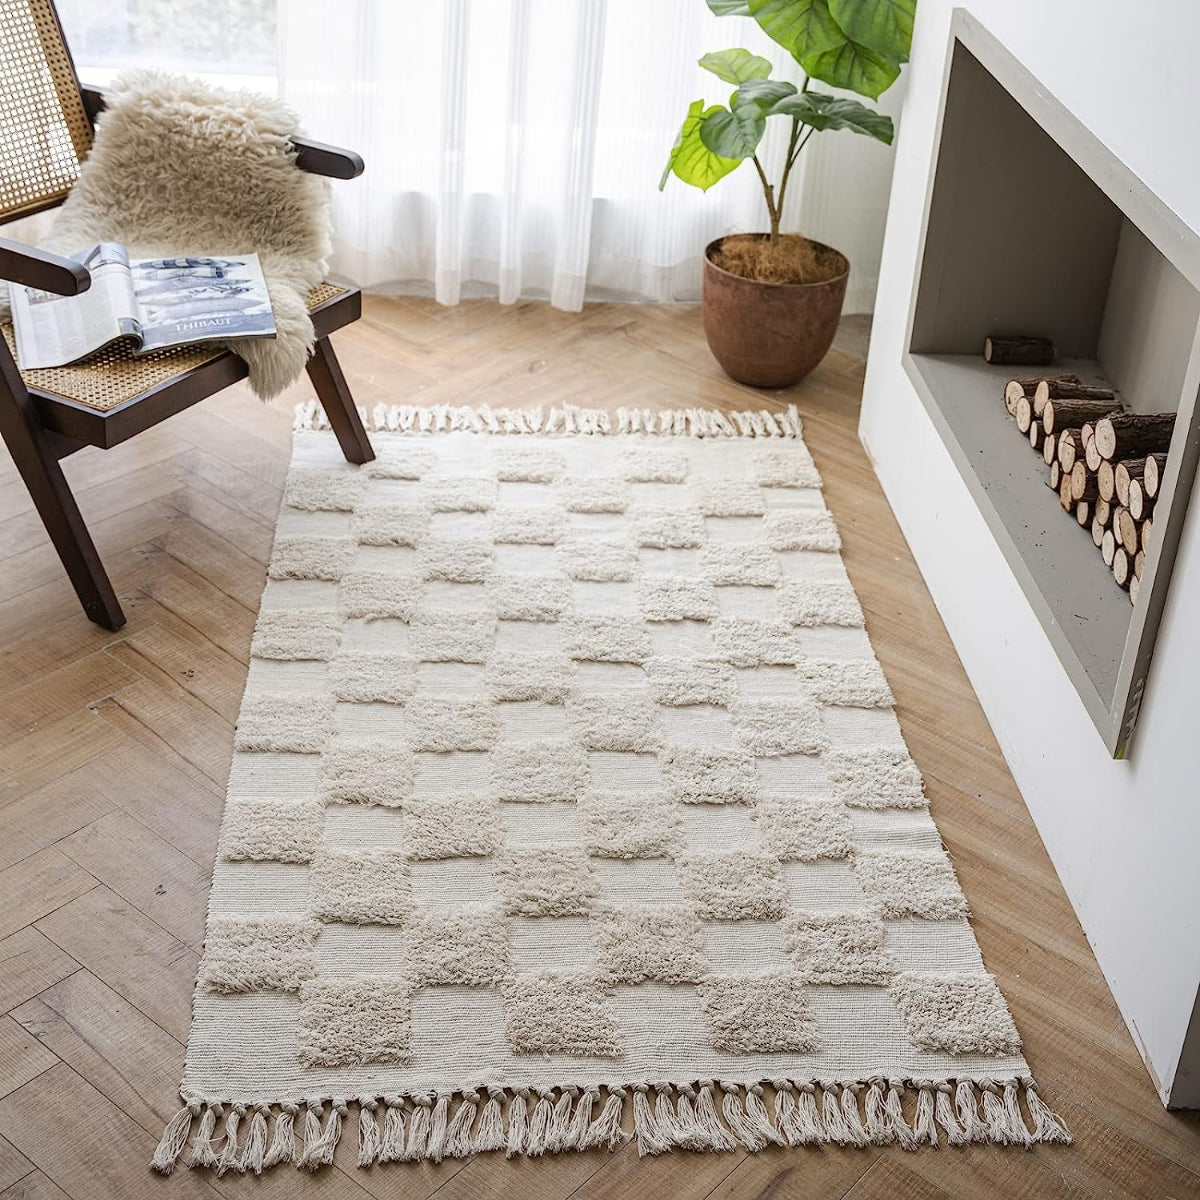 Boho Bathroom Rug 2' X 3' , Cotton Woven Washable Small Area Rugs with  Tassels